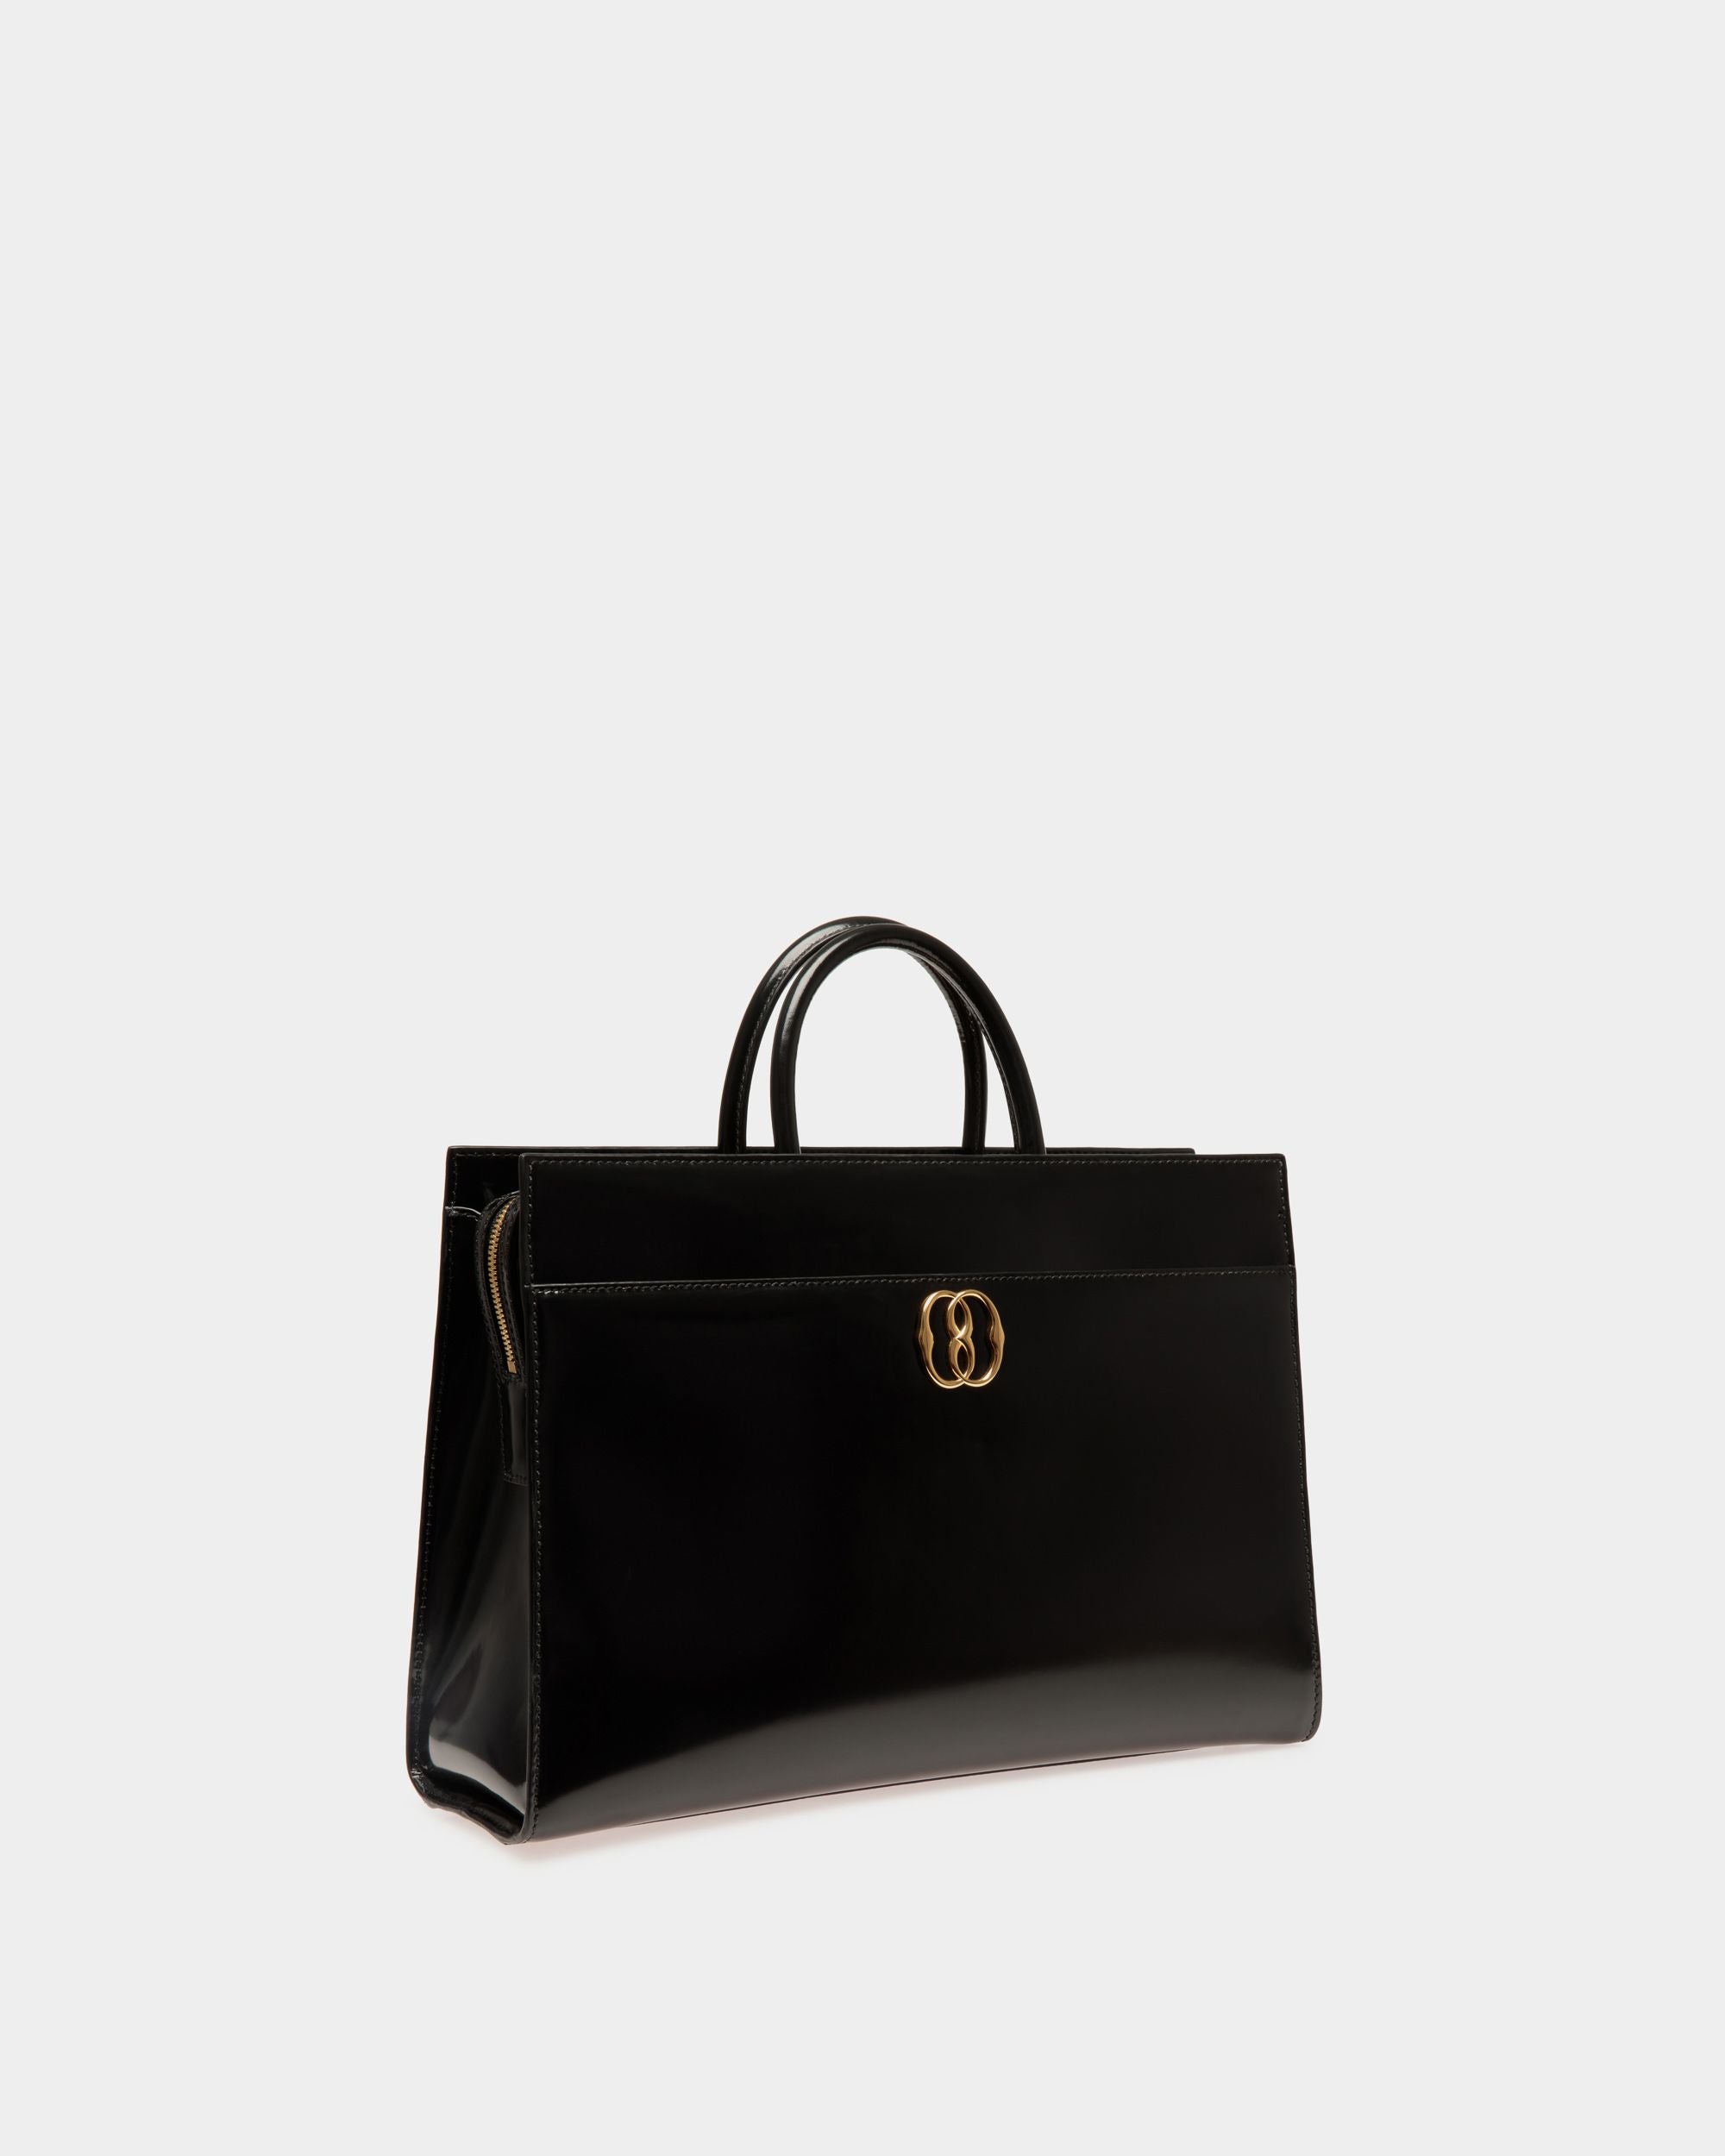 Emblem | Women's Tote Bag in Black Brushed Leather | Bally | Still Life 3/4 Front